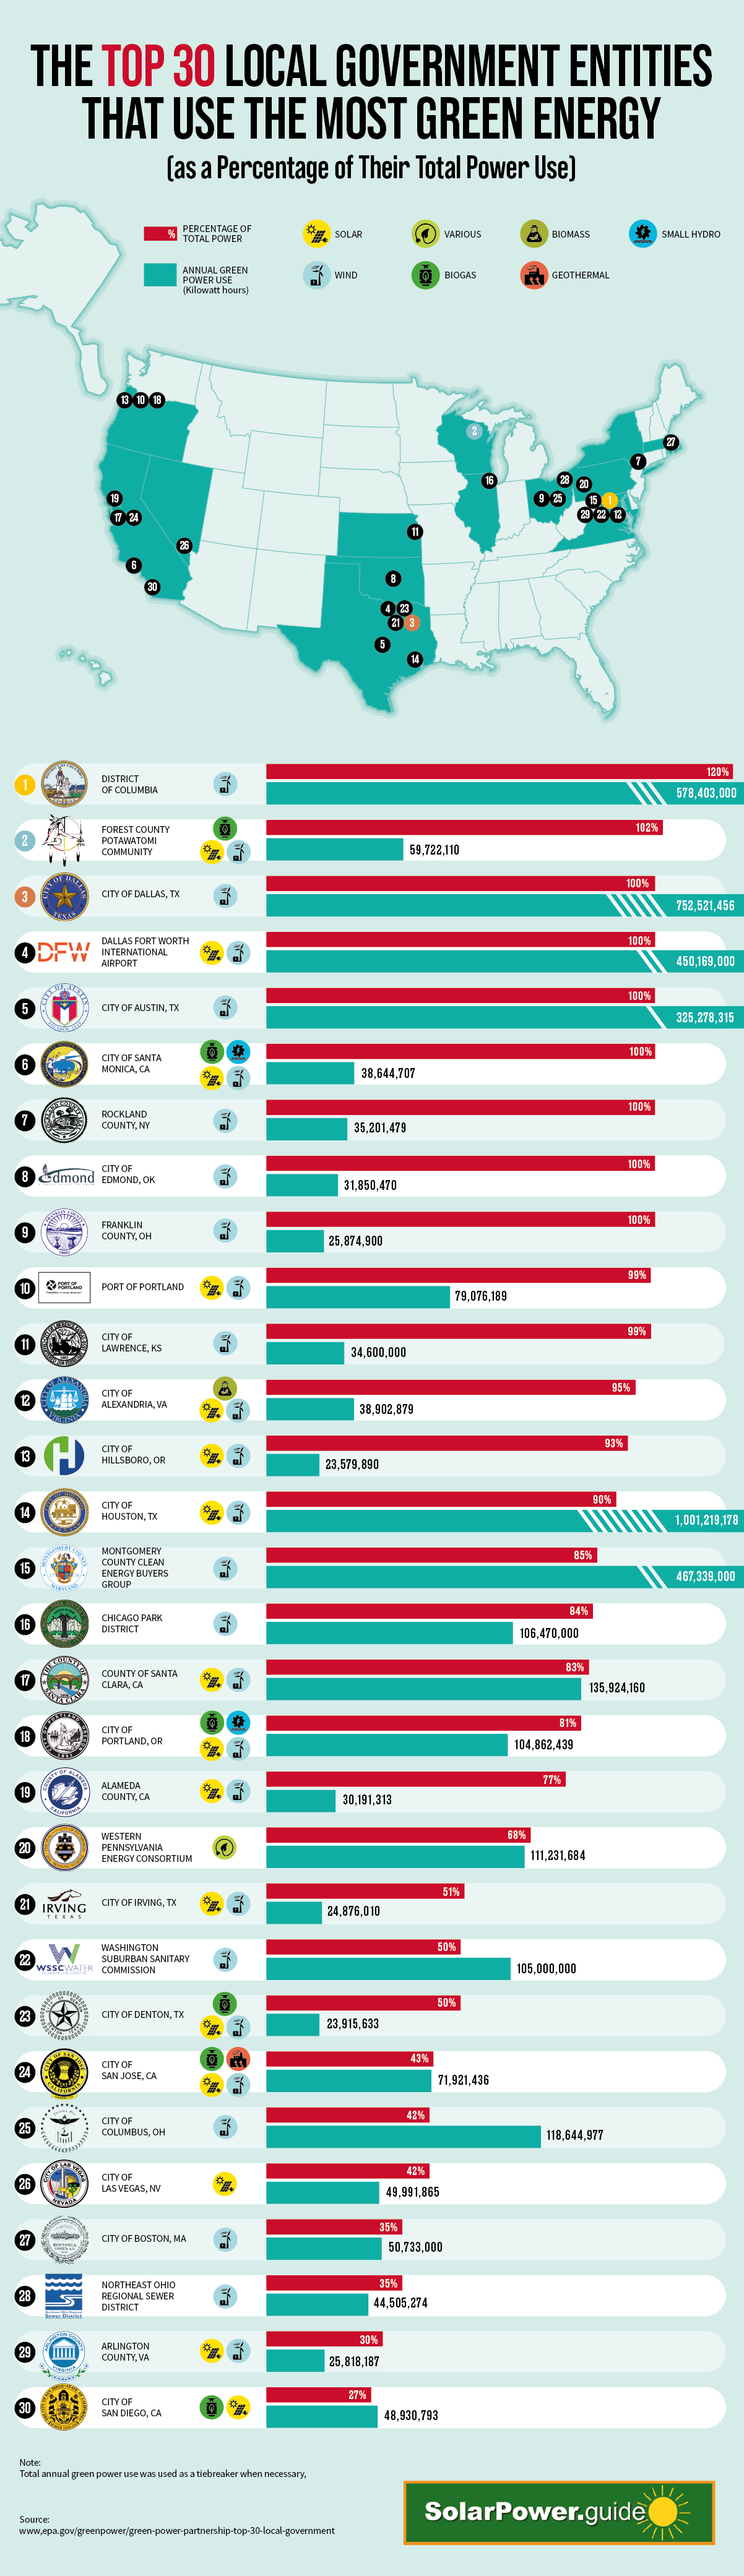 The Top 30 Local Government Entities That Use the Most Green Energy - Solar Power.Guide - Solar Energy - Infographic